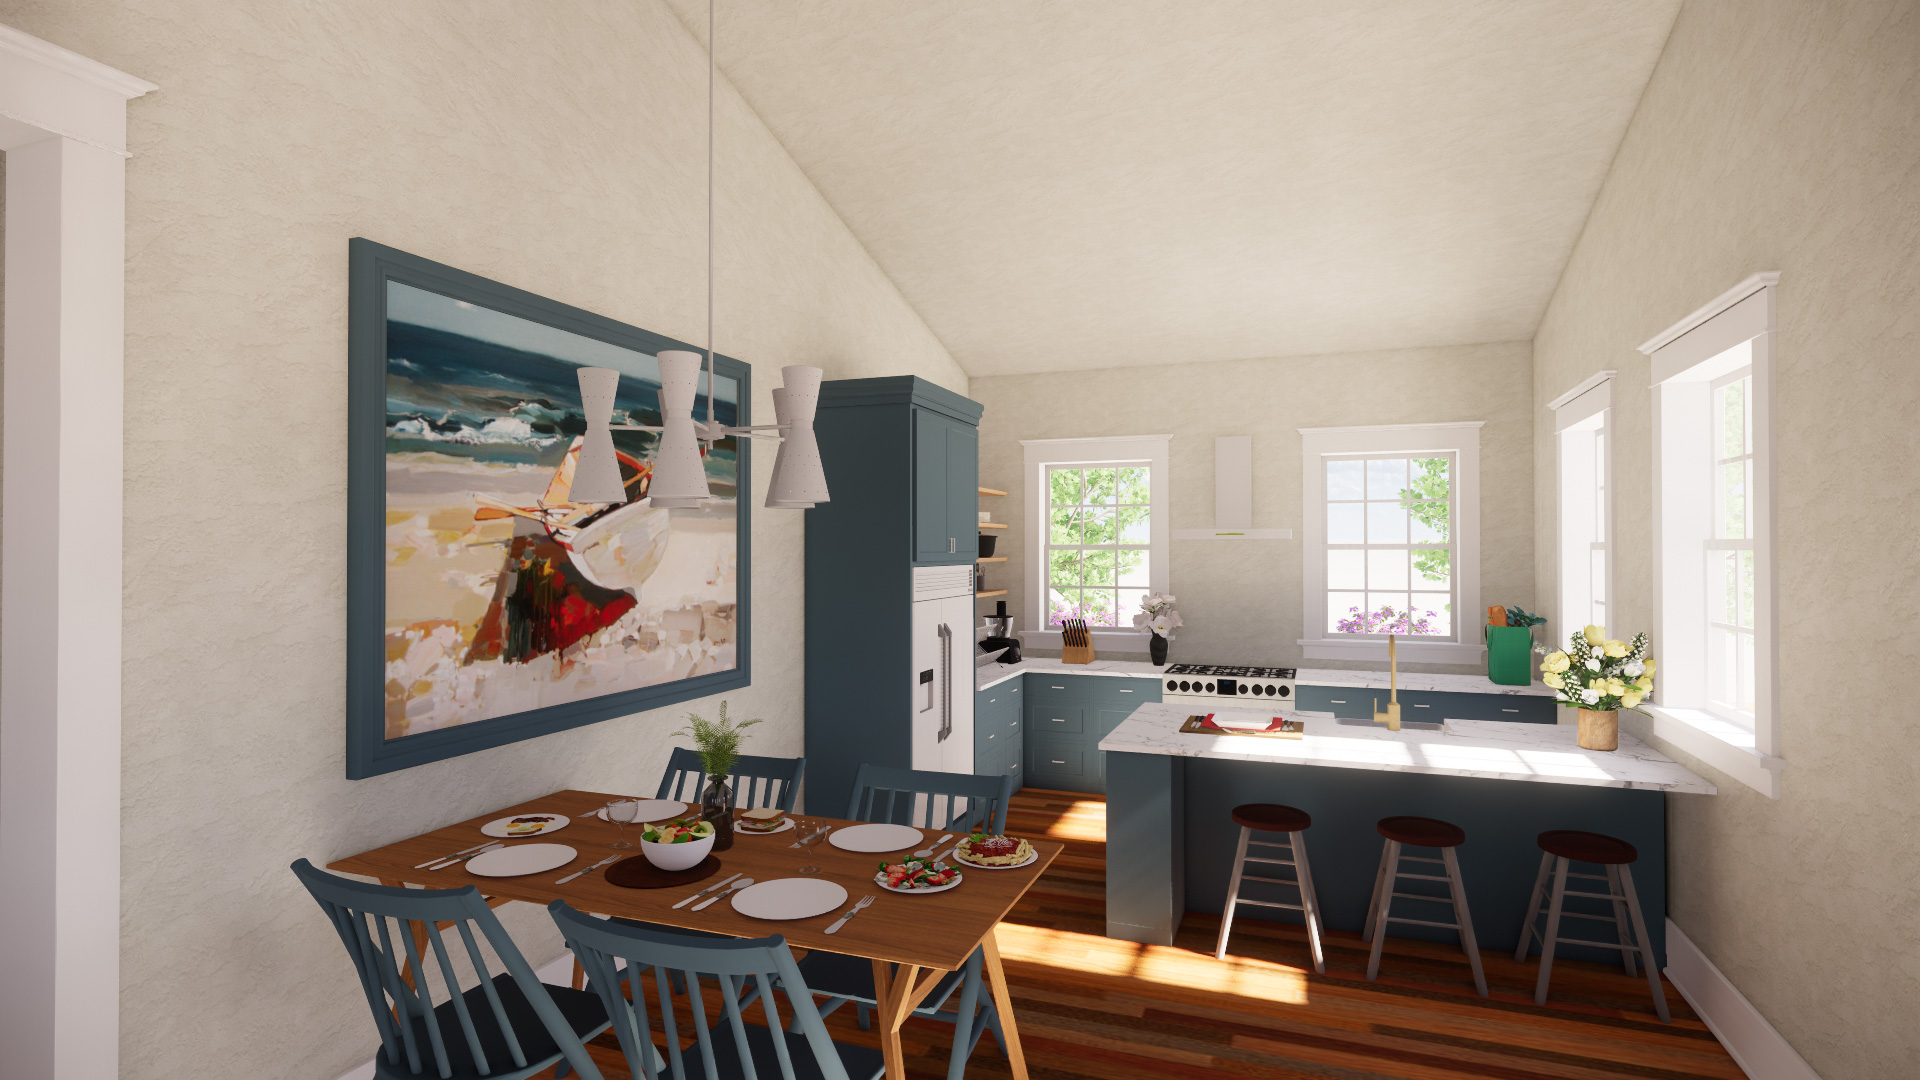 Interior render of kitchen, with full set dining table in foreground and countertop and appliances in back.